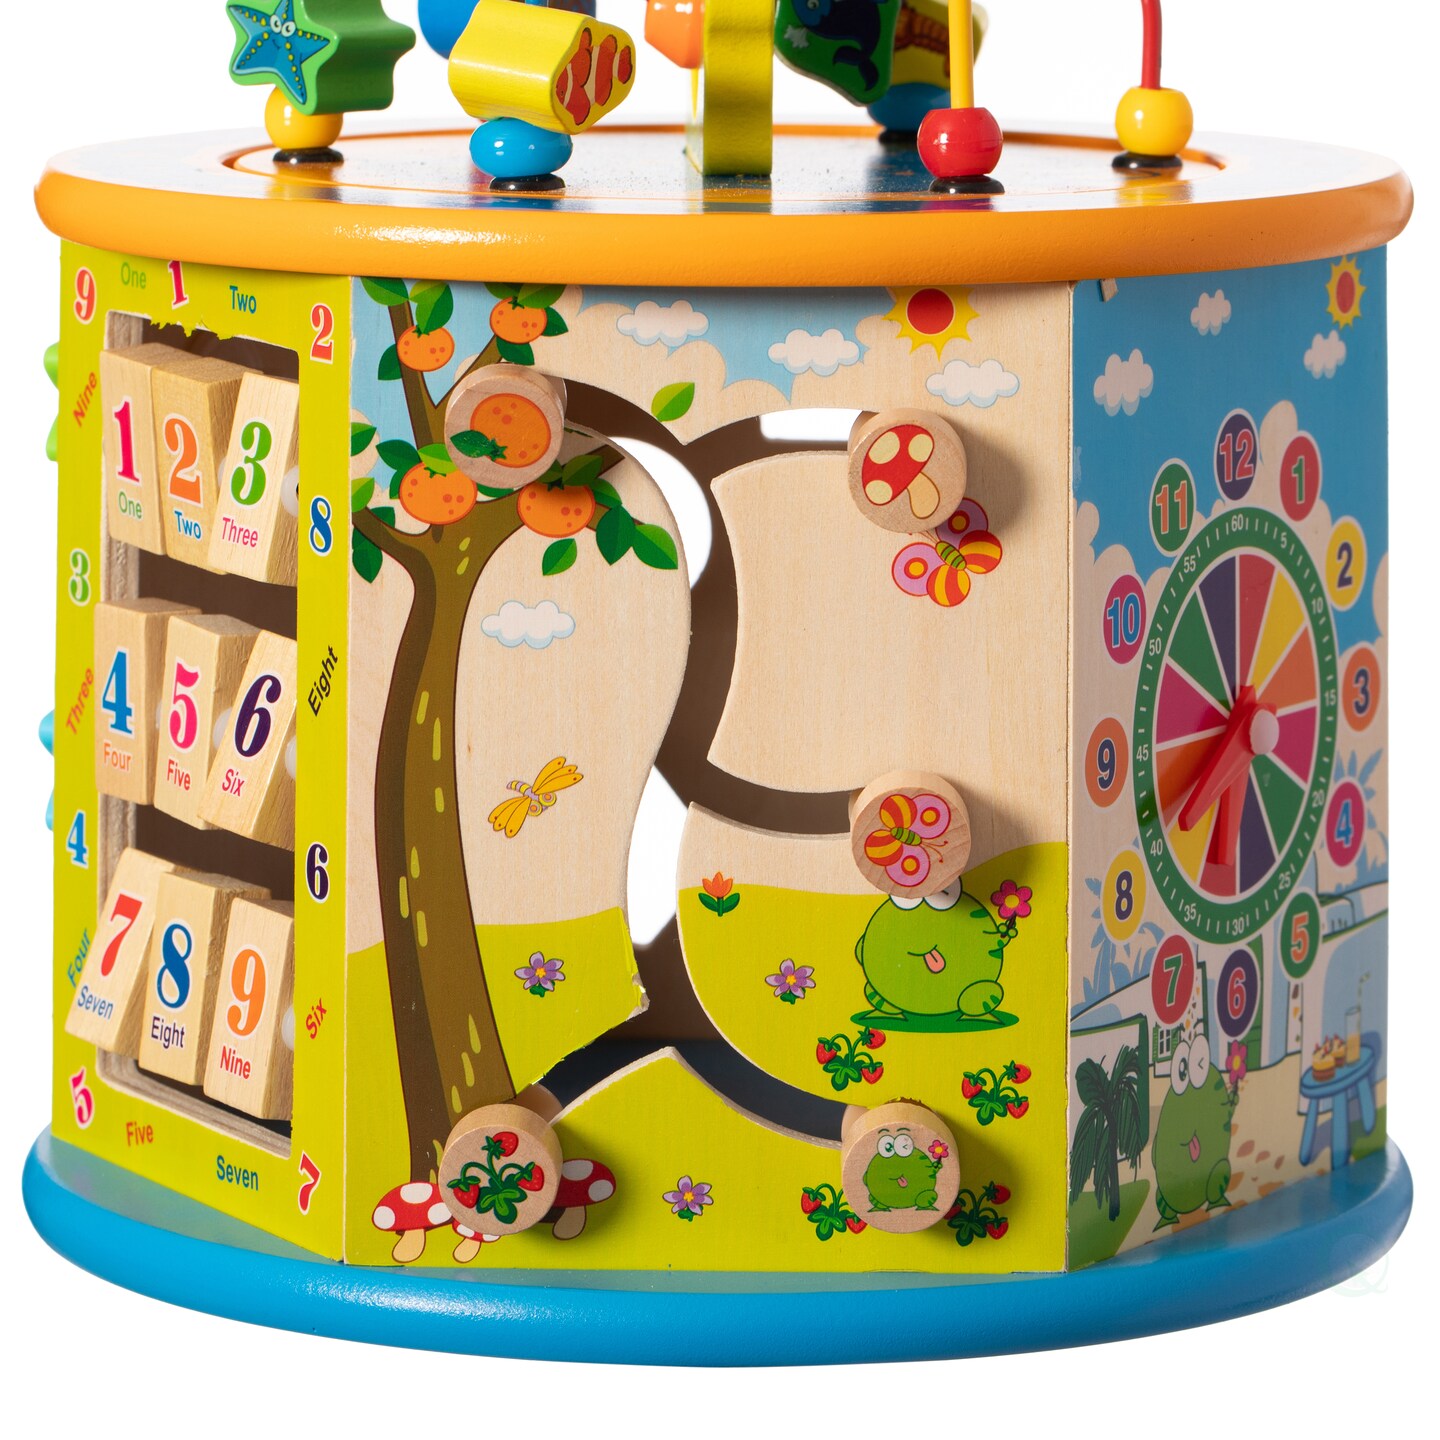 8 in 1 Colorful Attractive Wooden Kids Baby Activity Play Cube, Fun Toy Center For Playroom, Nursery, Preschool, and Doctors&#x27; Office